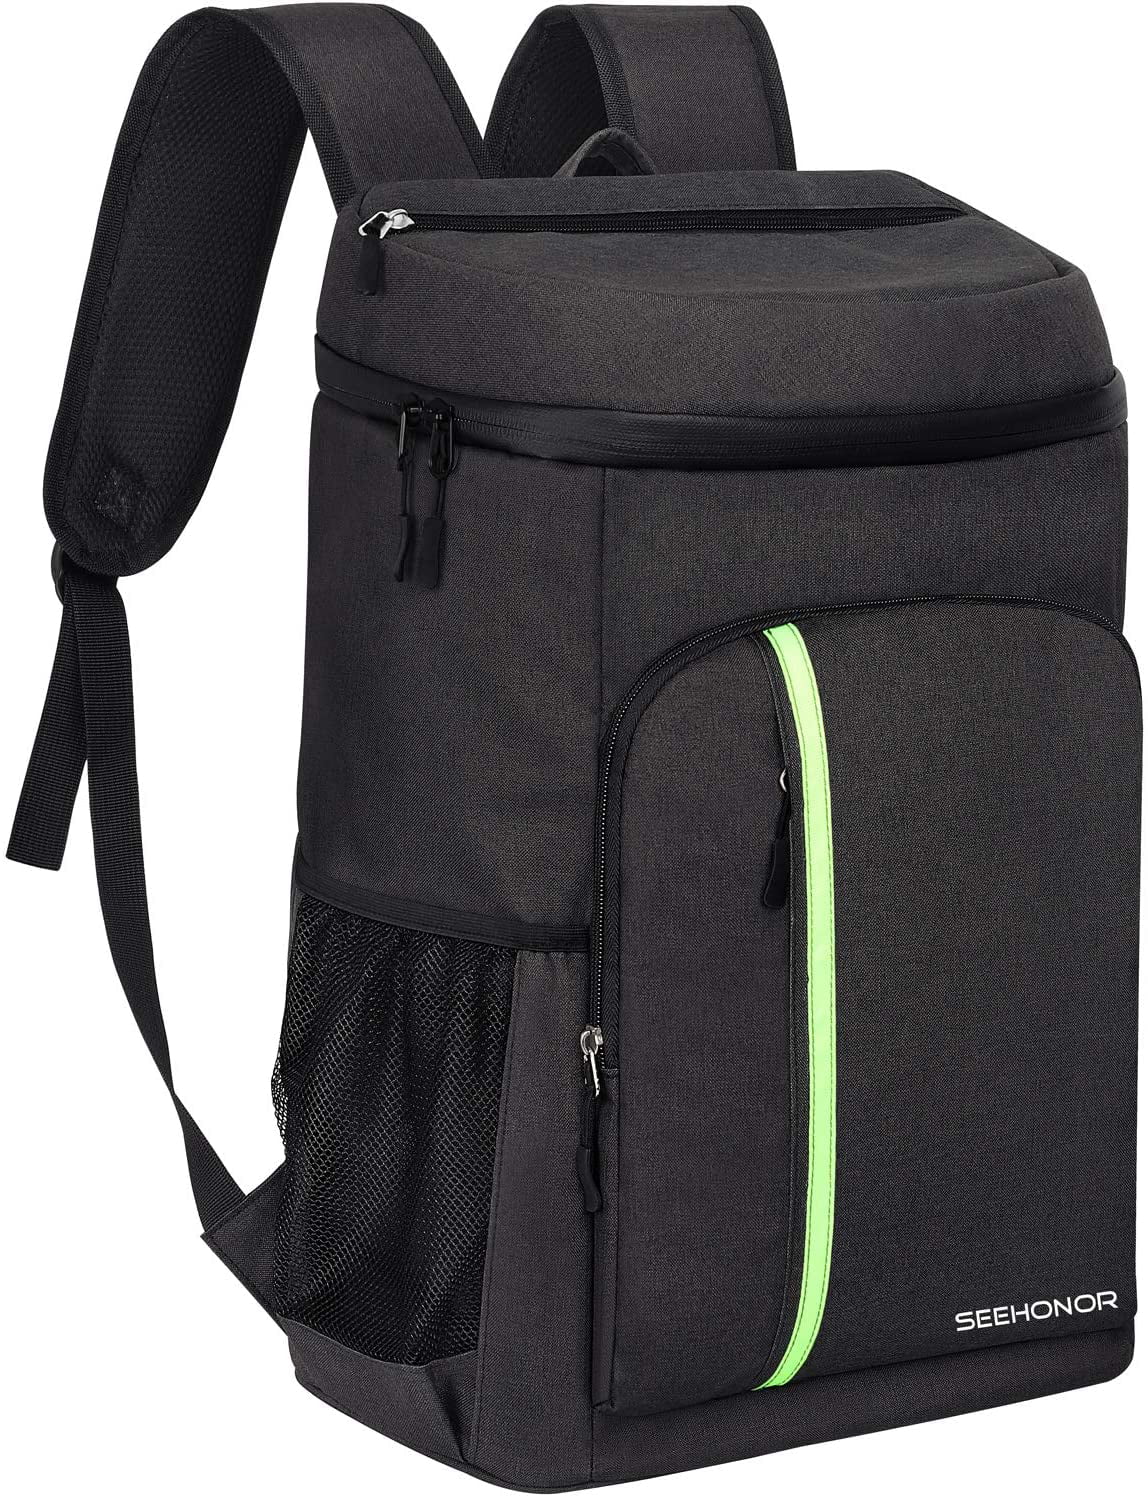 PENGDA Cool Bag Rucksack 25 Cans Insulated Backpack Large Capacity Lightweight 